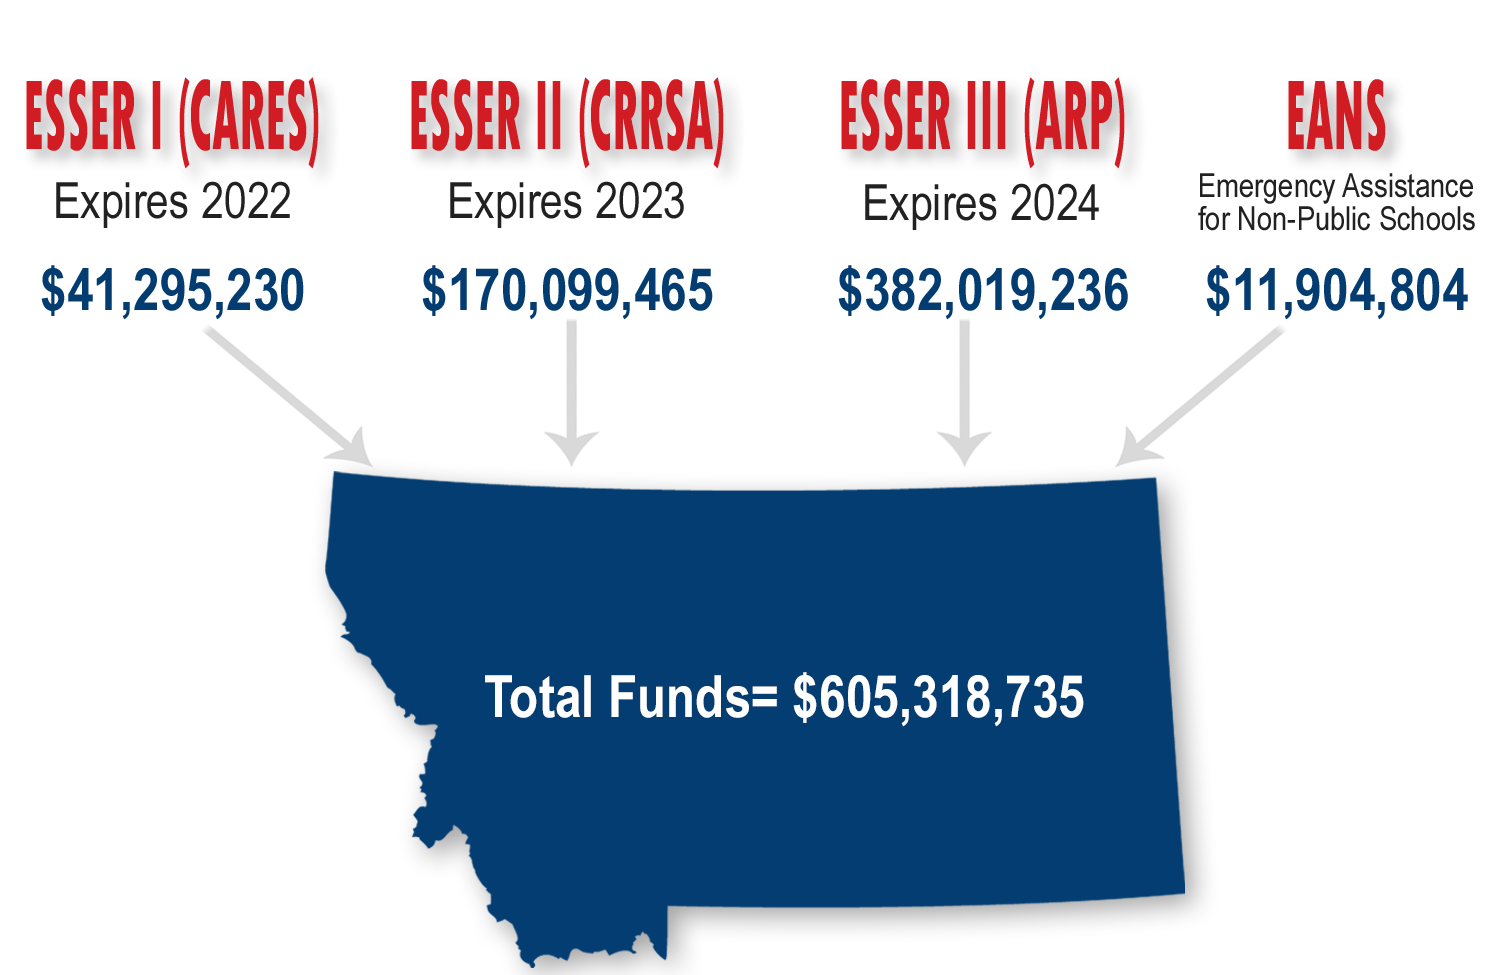 COVID-Related Funding Received for Public and Non-Public Schools Graphic: Elementary and Secondary School Emergency Relief ESSER I (CARES), Expires 2022 = $41,295,230; ESSER II (CRRSA), Expires 2023 = $170,099,465; ESSER III (ARP), Expires 2024= $382,019,236; Emergency Assistance for Non-Public Schools (EANS) = $24,679,709; Total Funds = $605,318,735